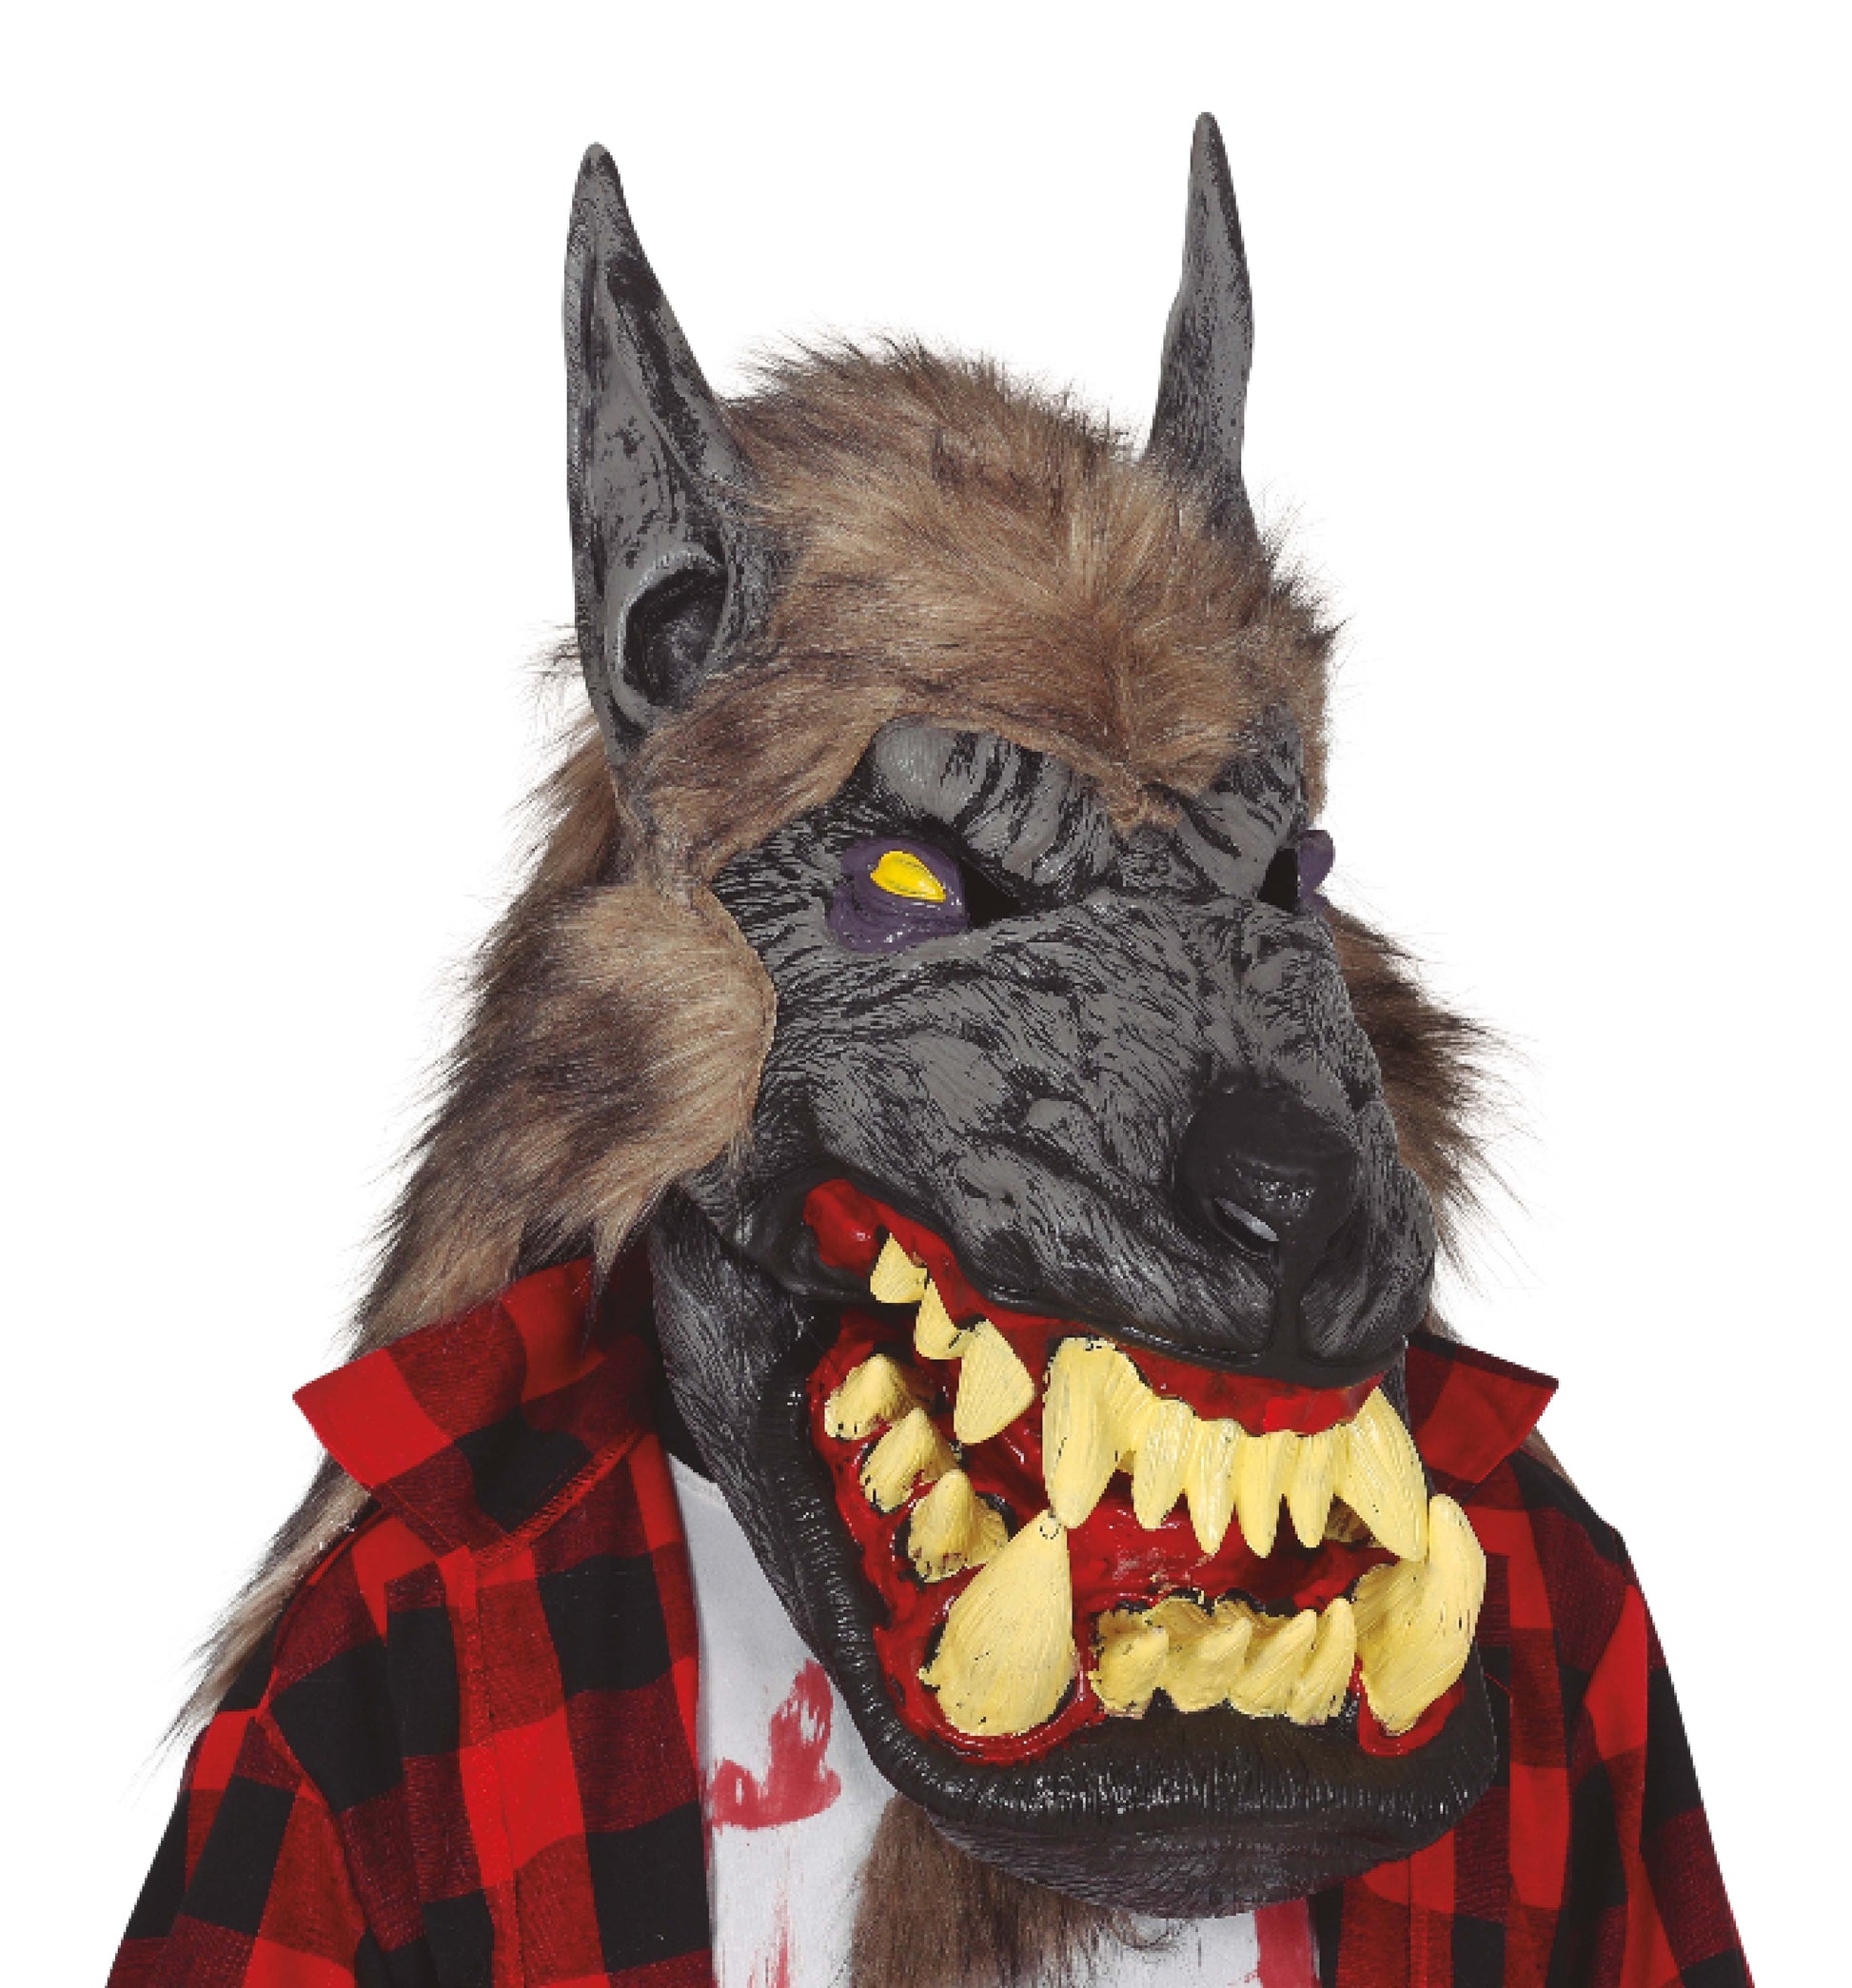 Giant Wolf Mask with oversized mouth and hair. Latex